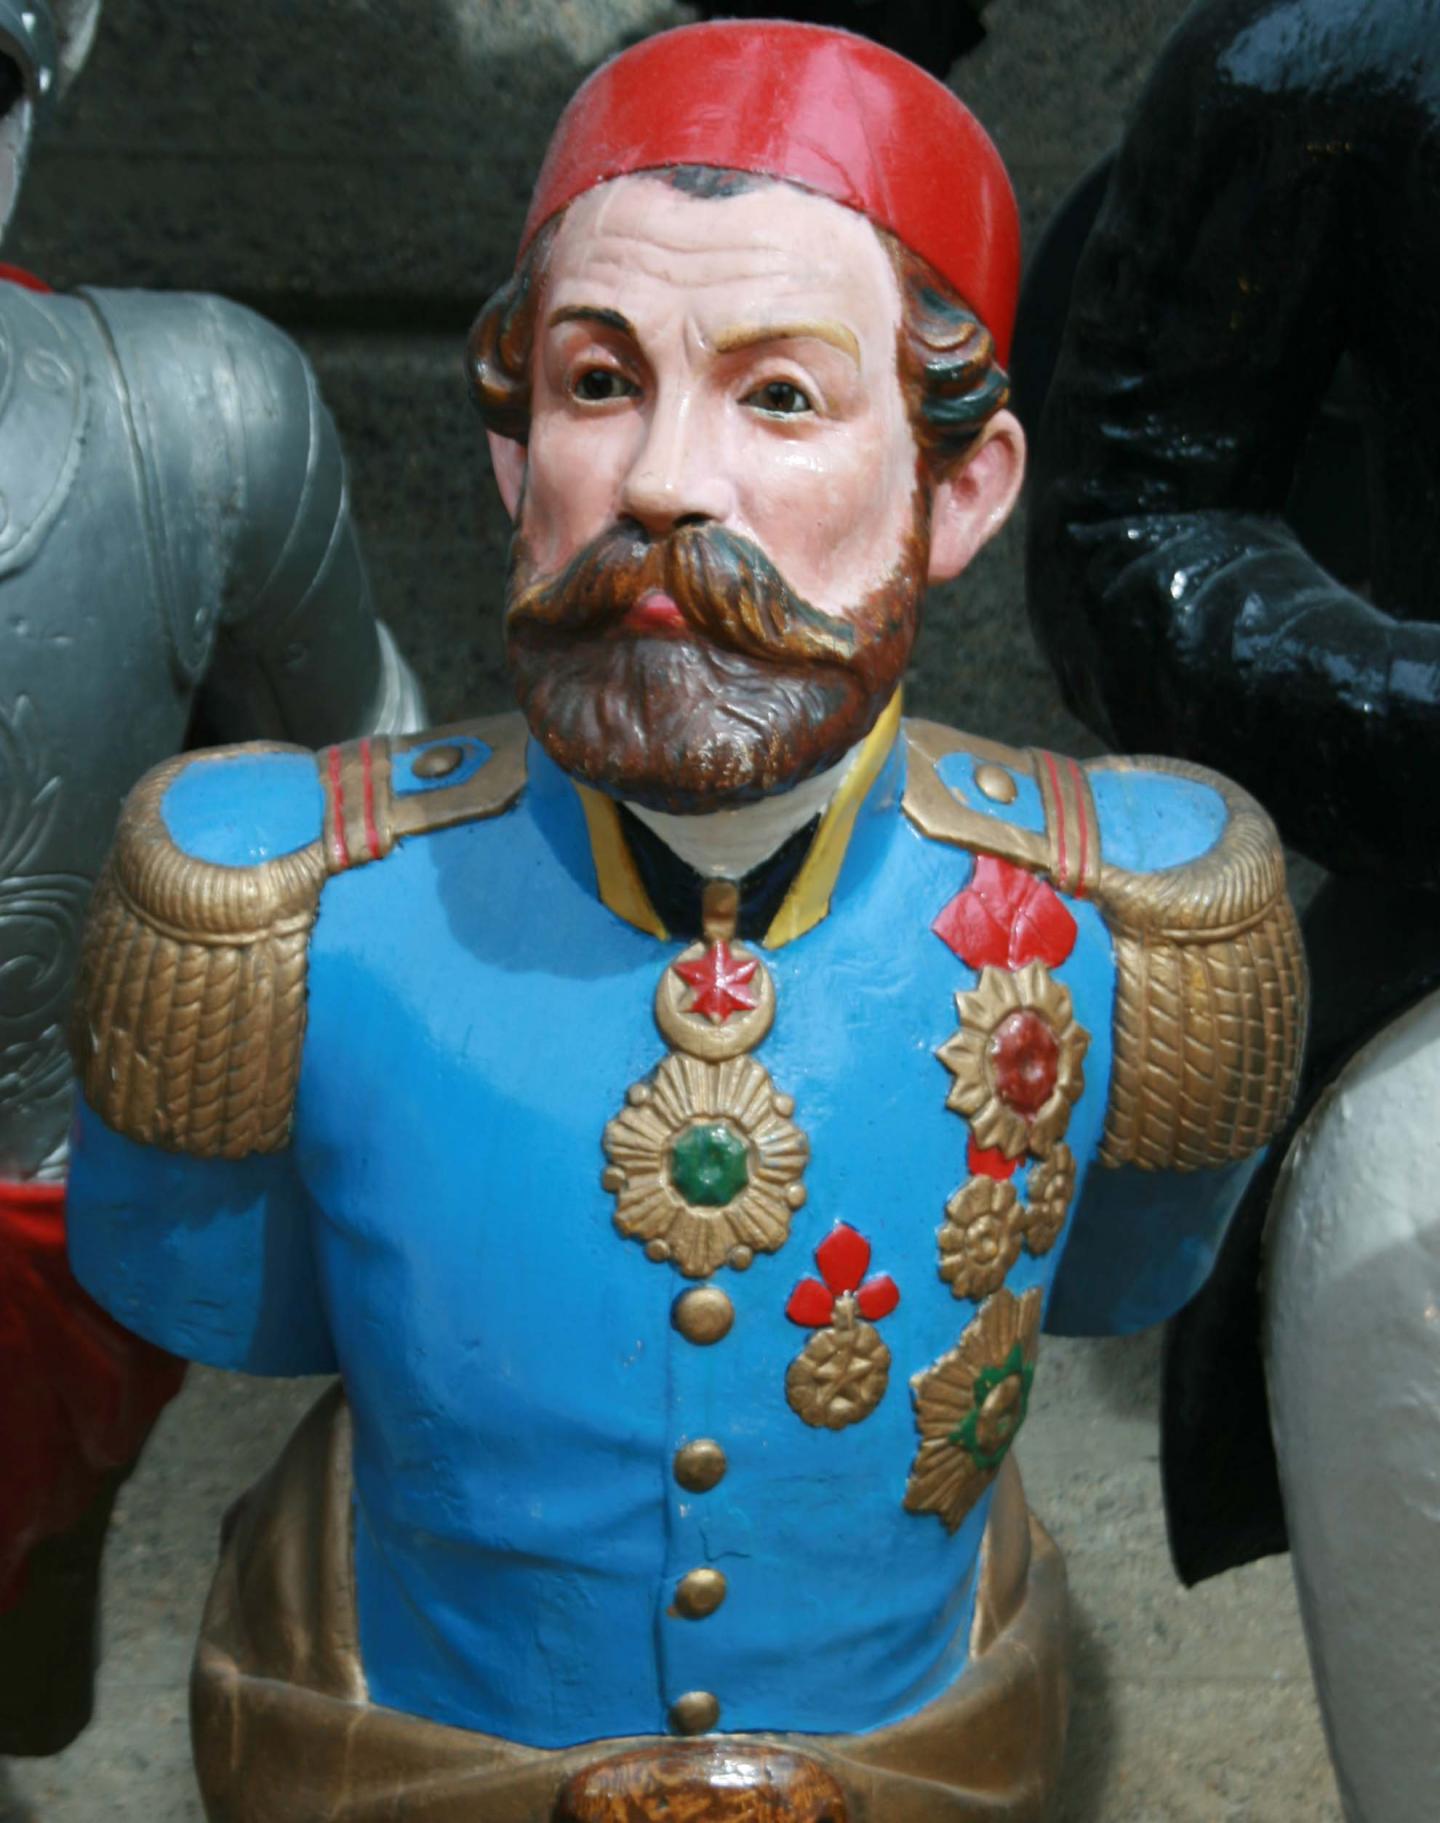 Omar Pasha, part of the Cutty Sark figurehead collection